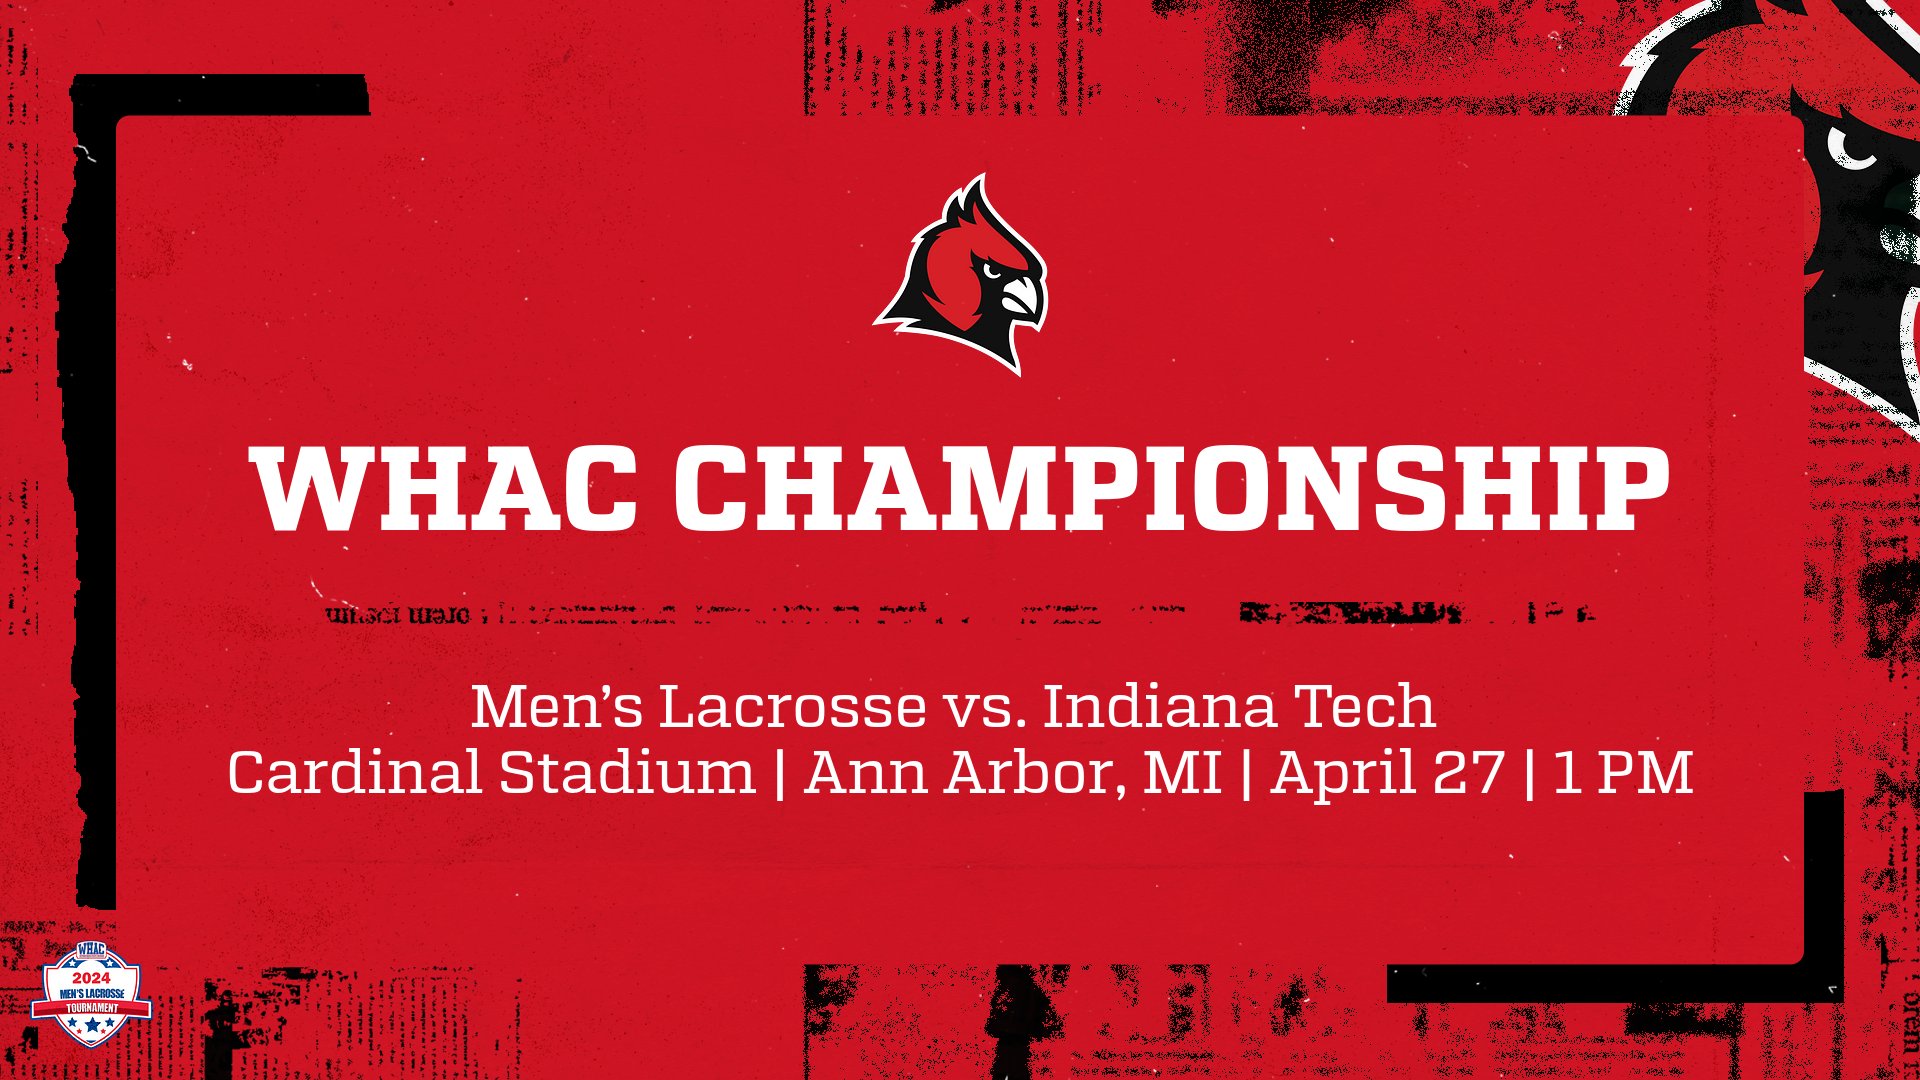 WHAC CHAMPIONSHIP PREVIEW: Men's Lacrosse set to battle Indiana Tech in WHAC Championship game